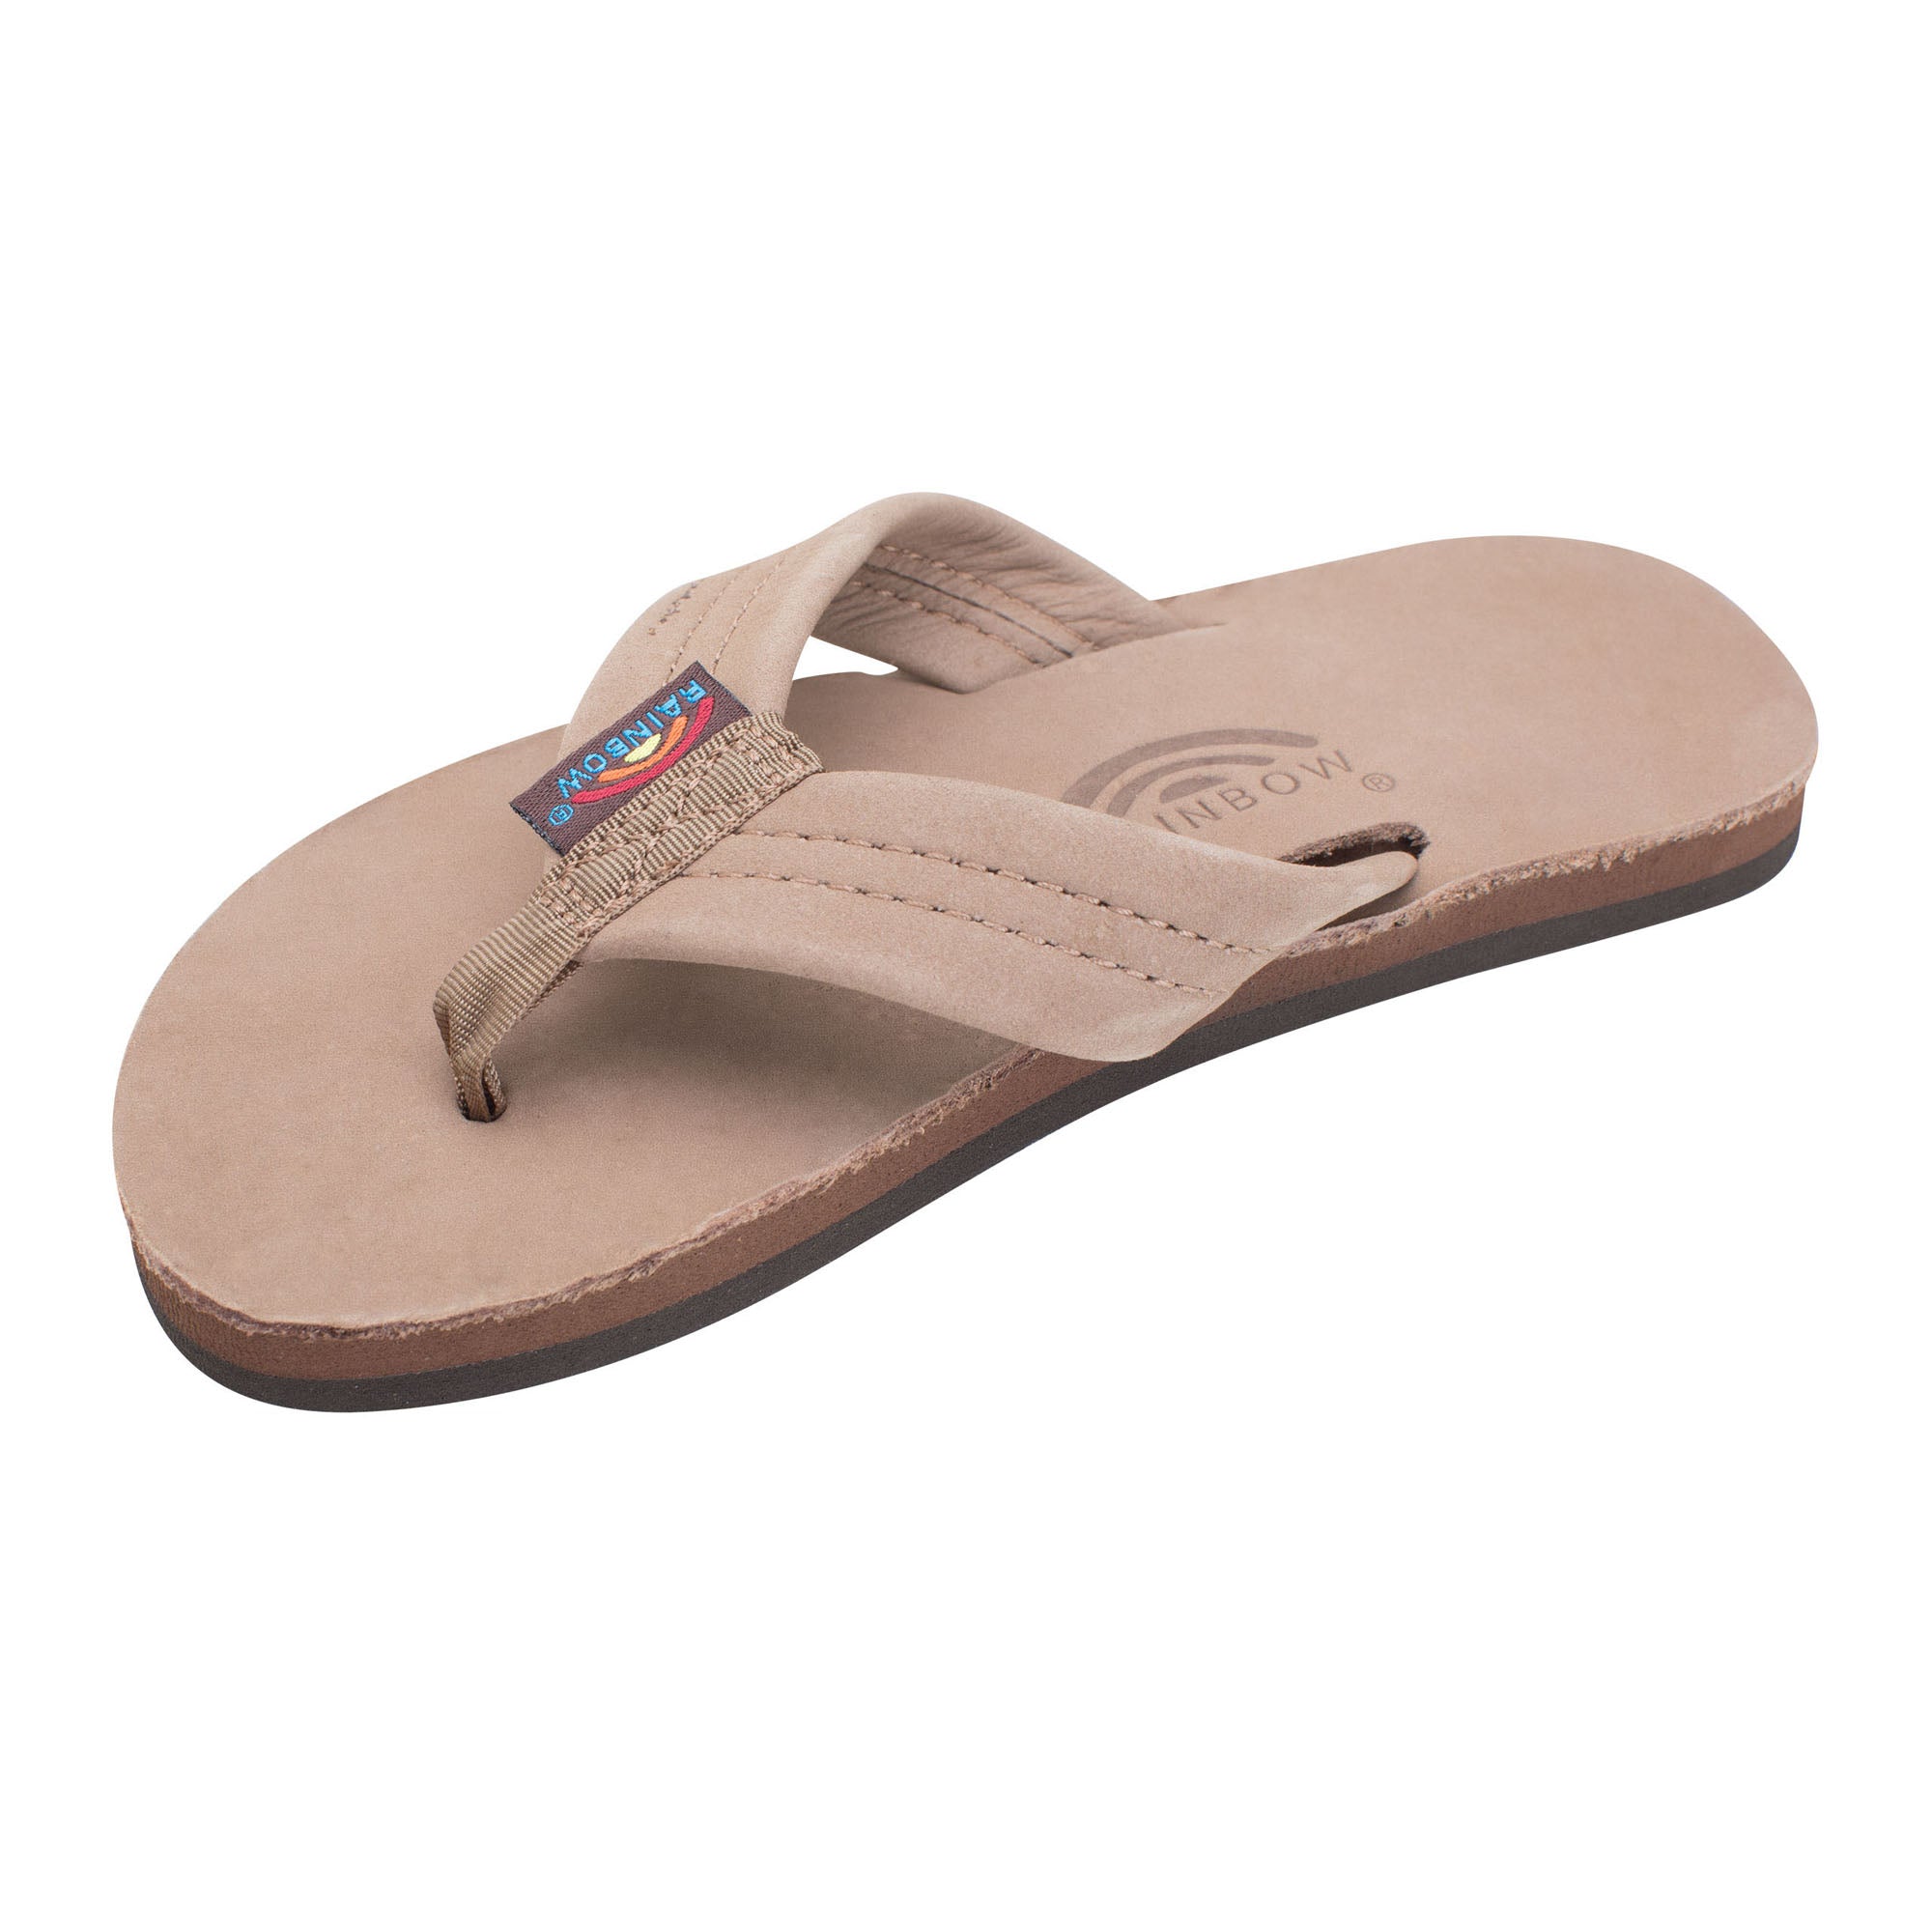 Rainbow Premier Leather Youth Boy's Sandals